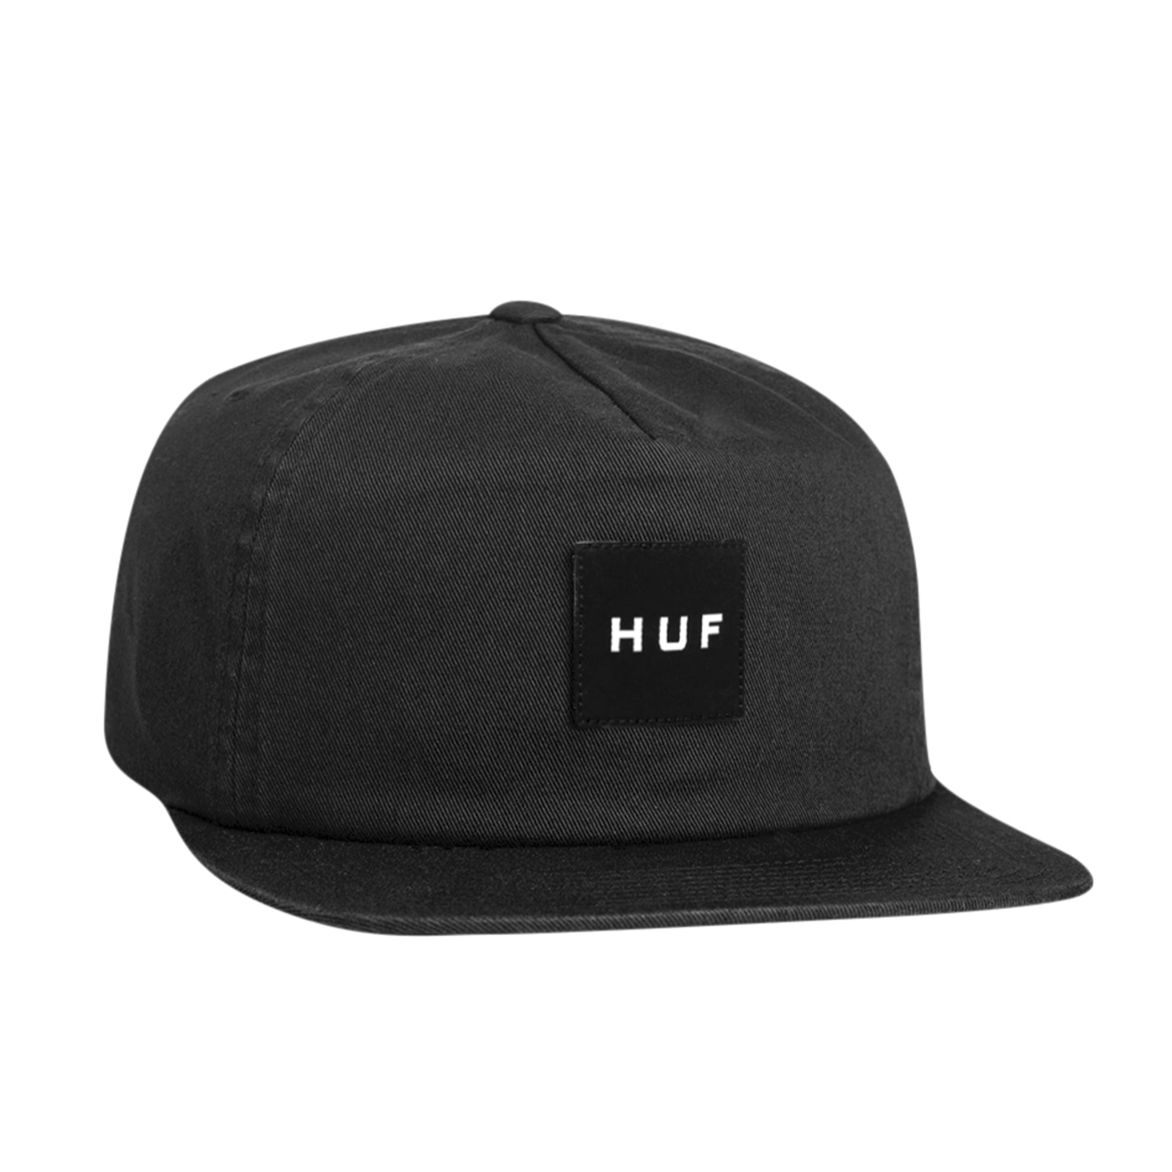 HUF - Essential Unstructured Box Snapback